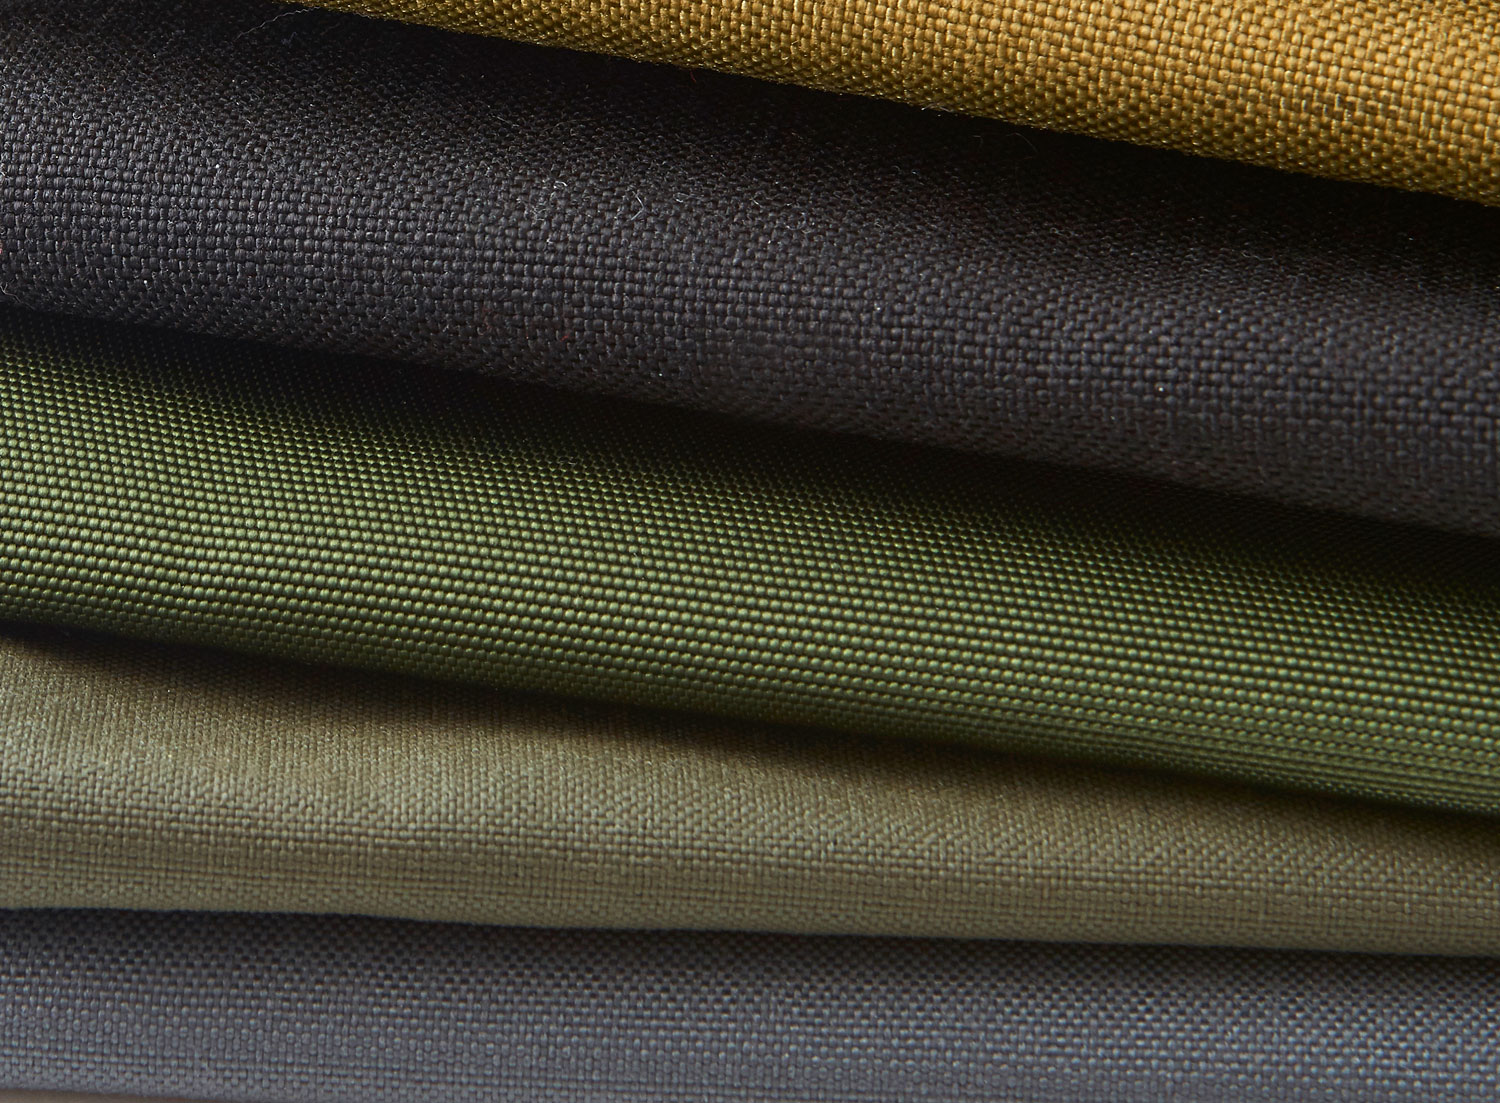 COMPACT Details about   ATACS FG Mil-spec fabric sheet wrap IR proof All surface waterproof